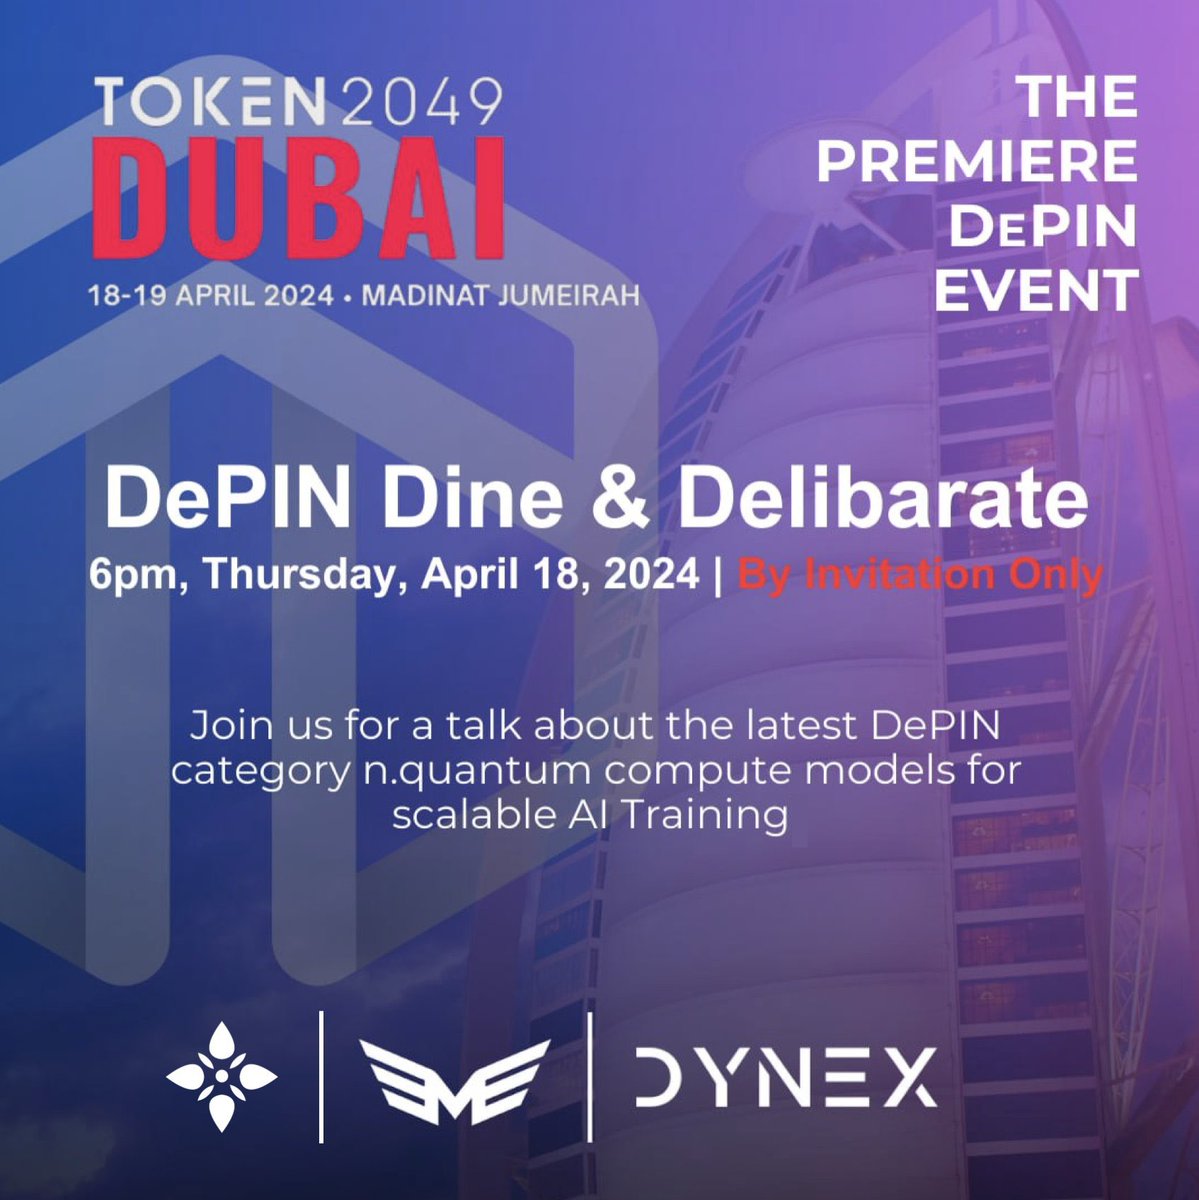 Congratulations to @Altcoinist_com who won the seat at the table at our exclusive @token2049 #Dubai event 🔥 🚀
As much as we would like to welcome all of you, we have to select 30 attendees from almost 1k applications … incredible but not an easy task. Thinking of doing…